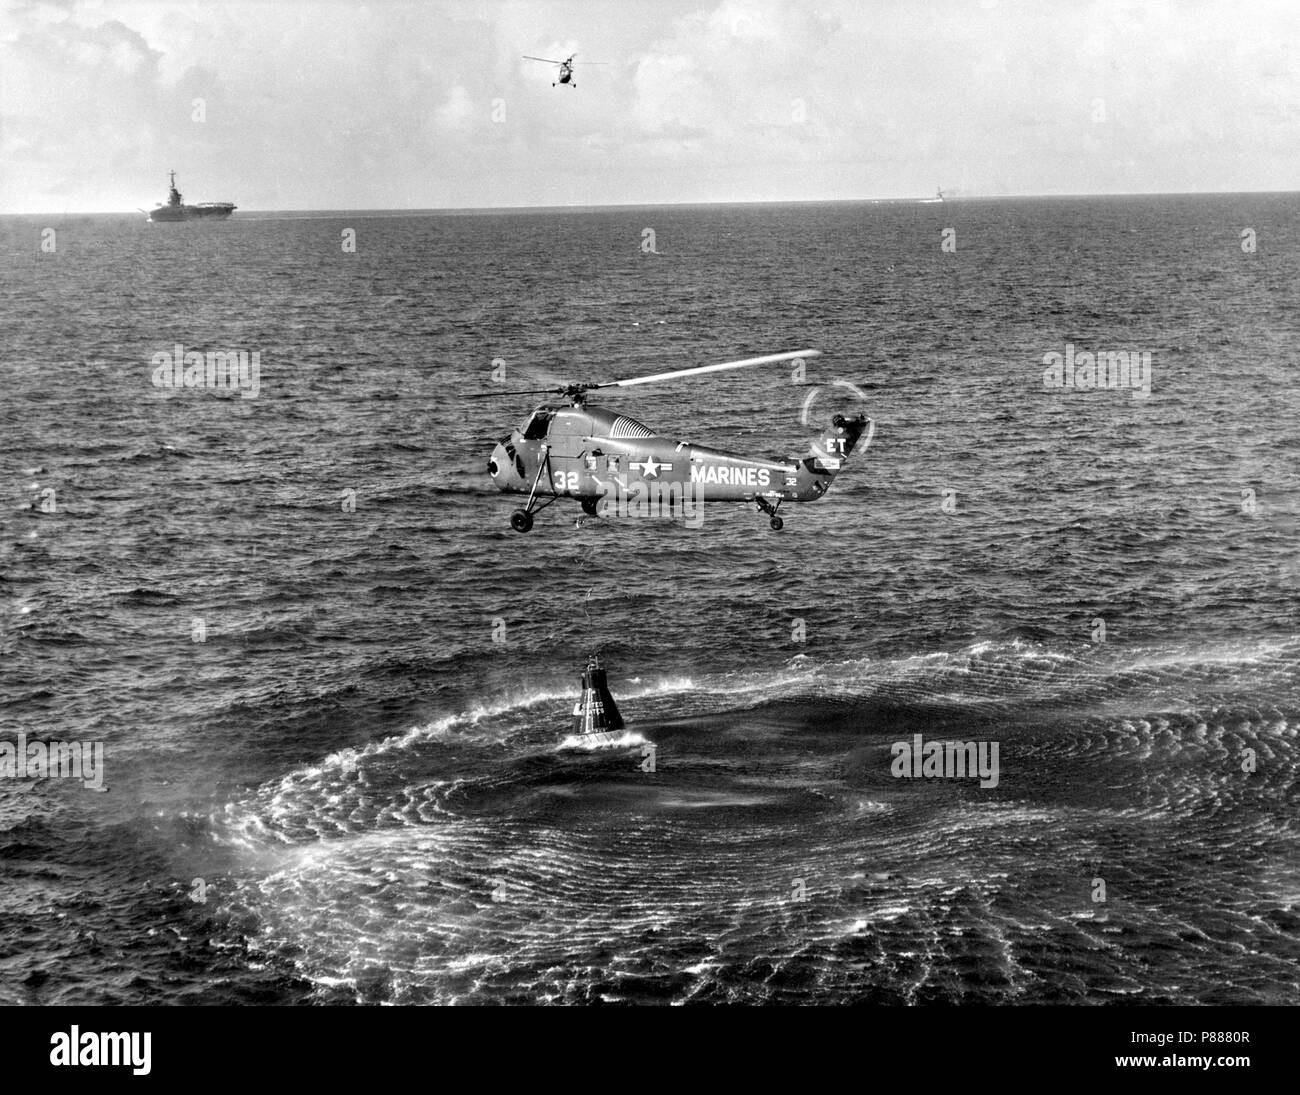 Attempted recovery of Mercury spacecraft at end of the Mercury-Redstone 4 (MR-4) mission. View shows the Marine helicopter dropping a recovery line to the capsule Stock Photo